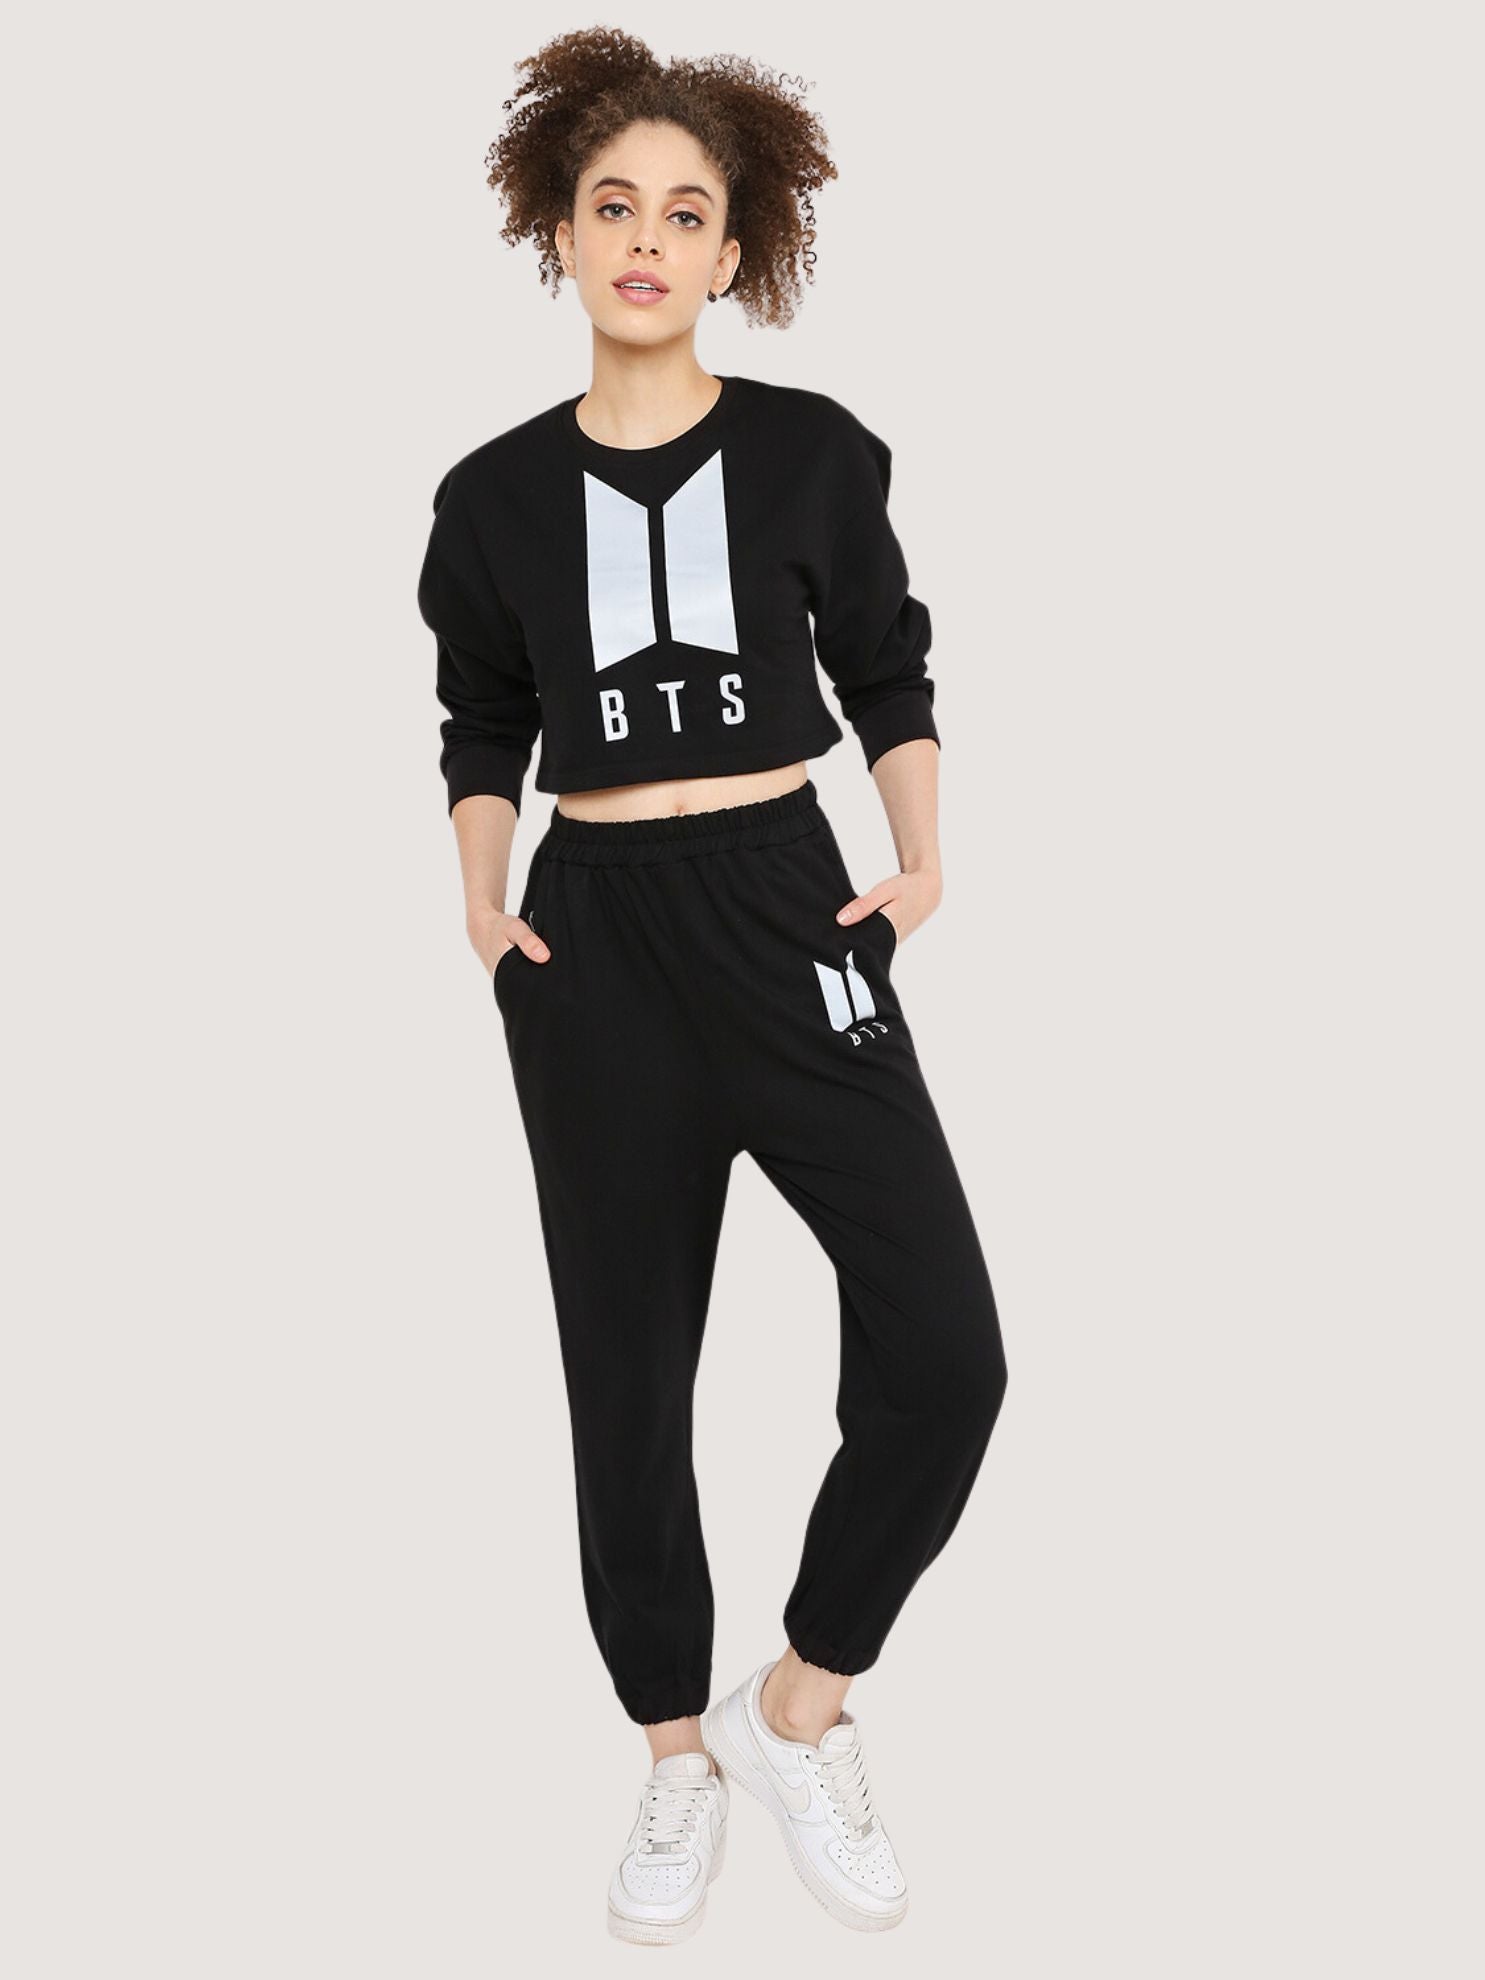 Bts Merch -sweatshirt With Joggers Combo Offer